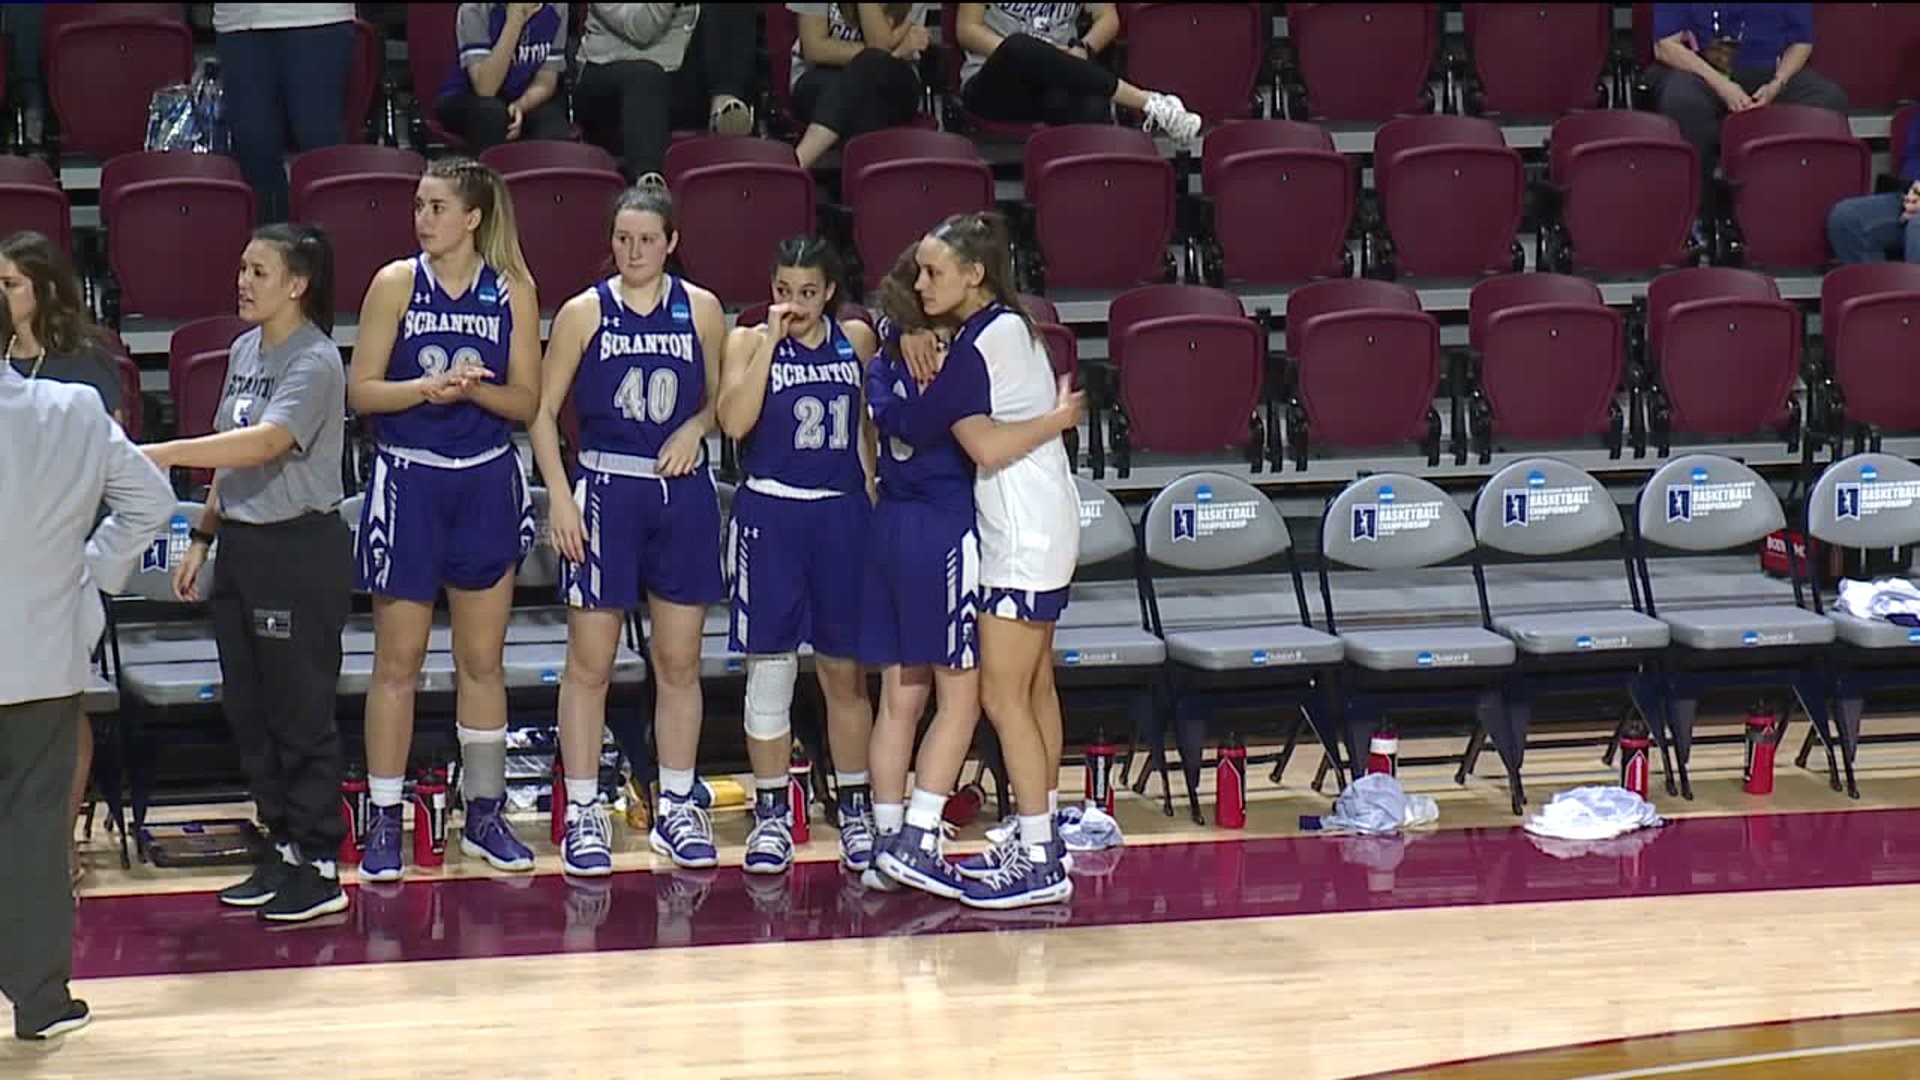 Lady Royals Reflect on Final Four Run